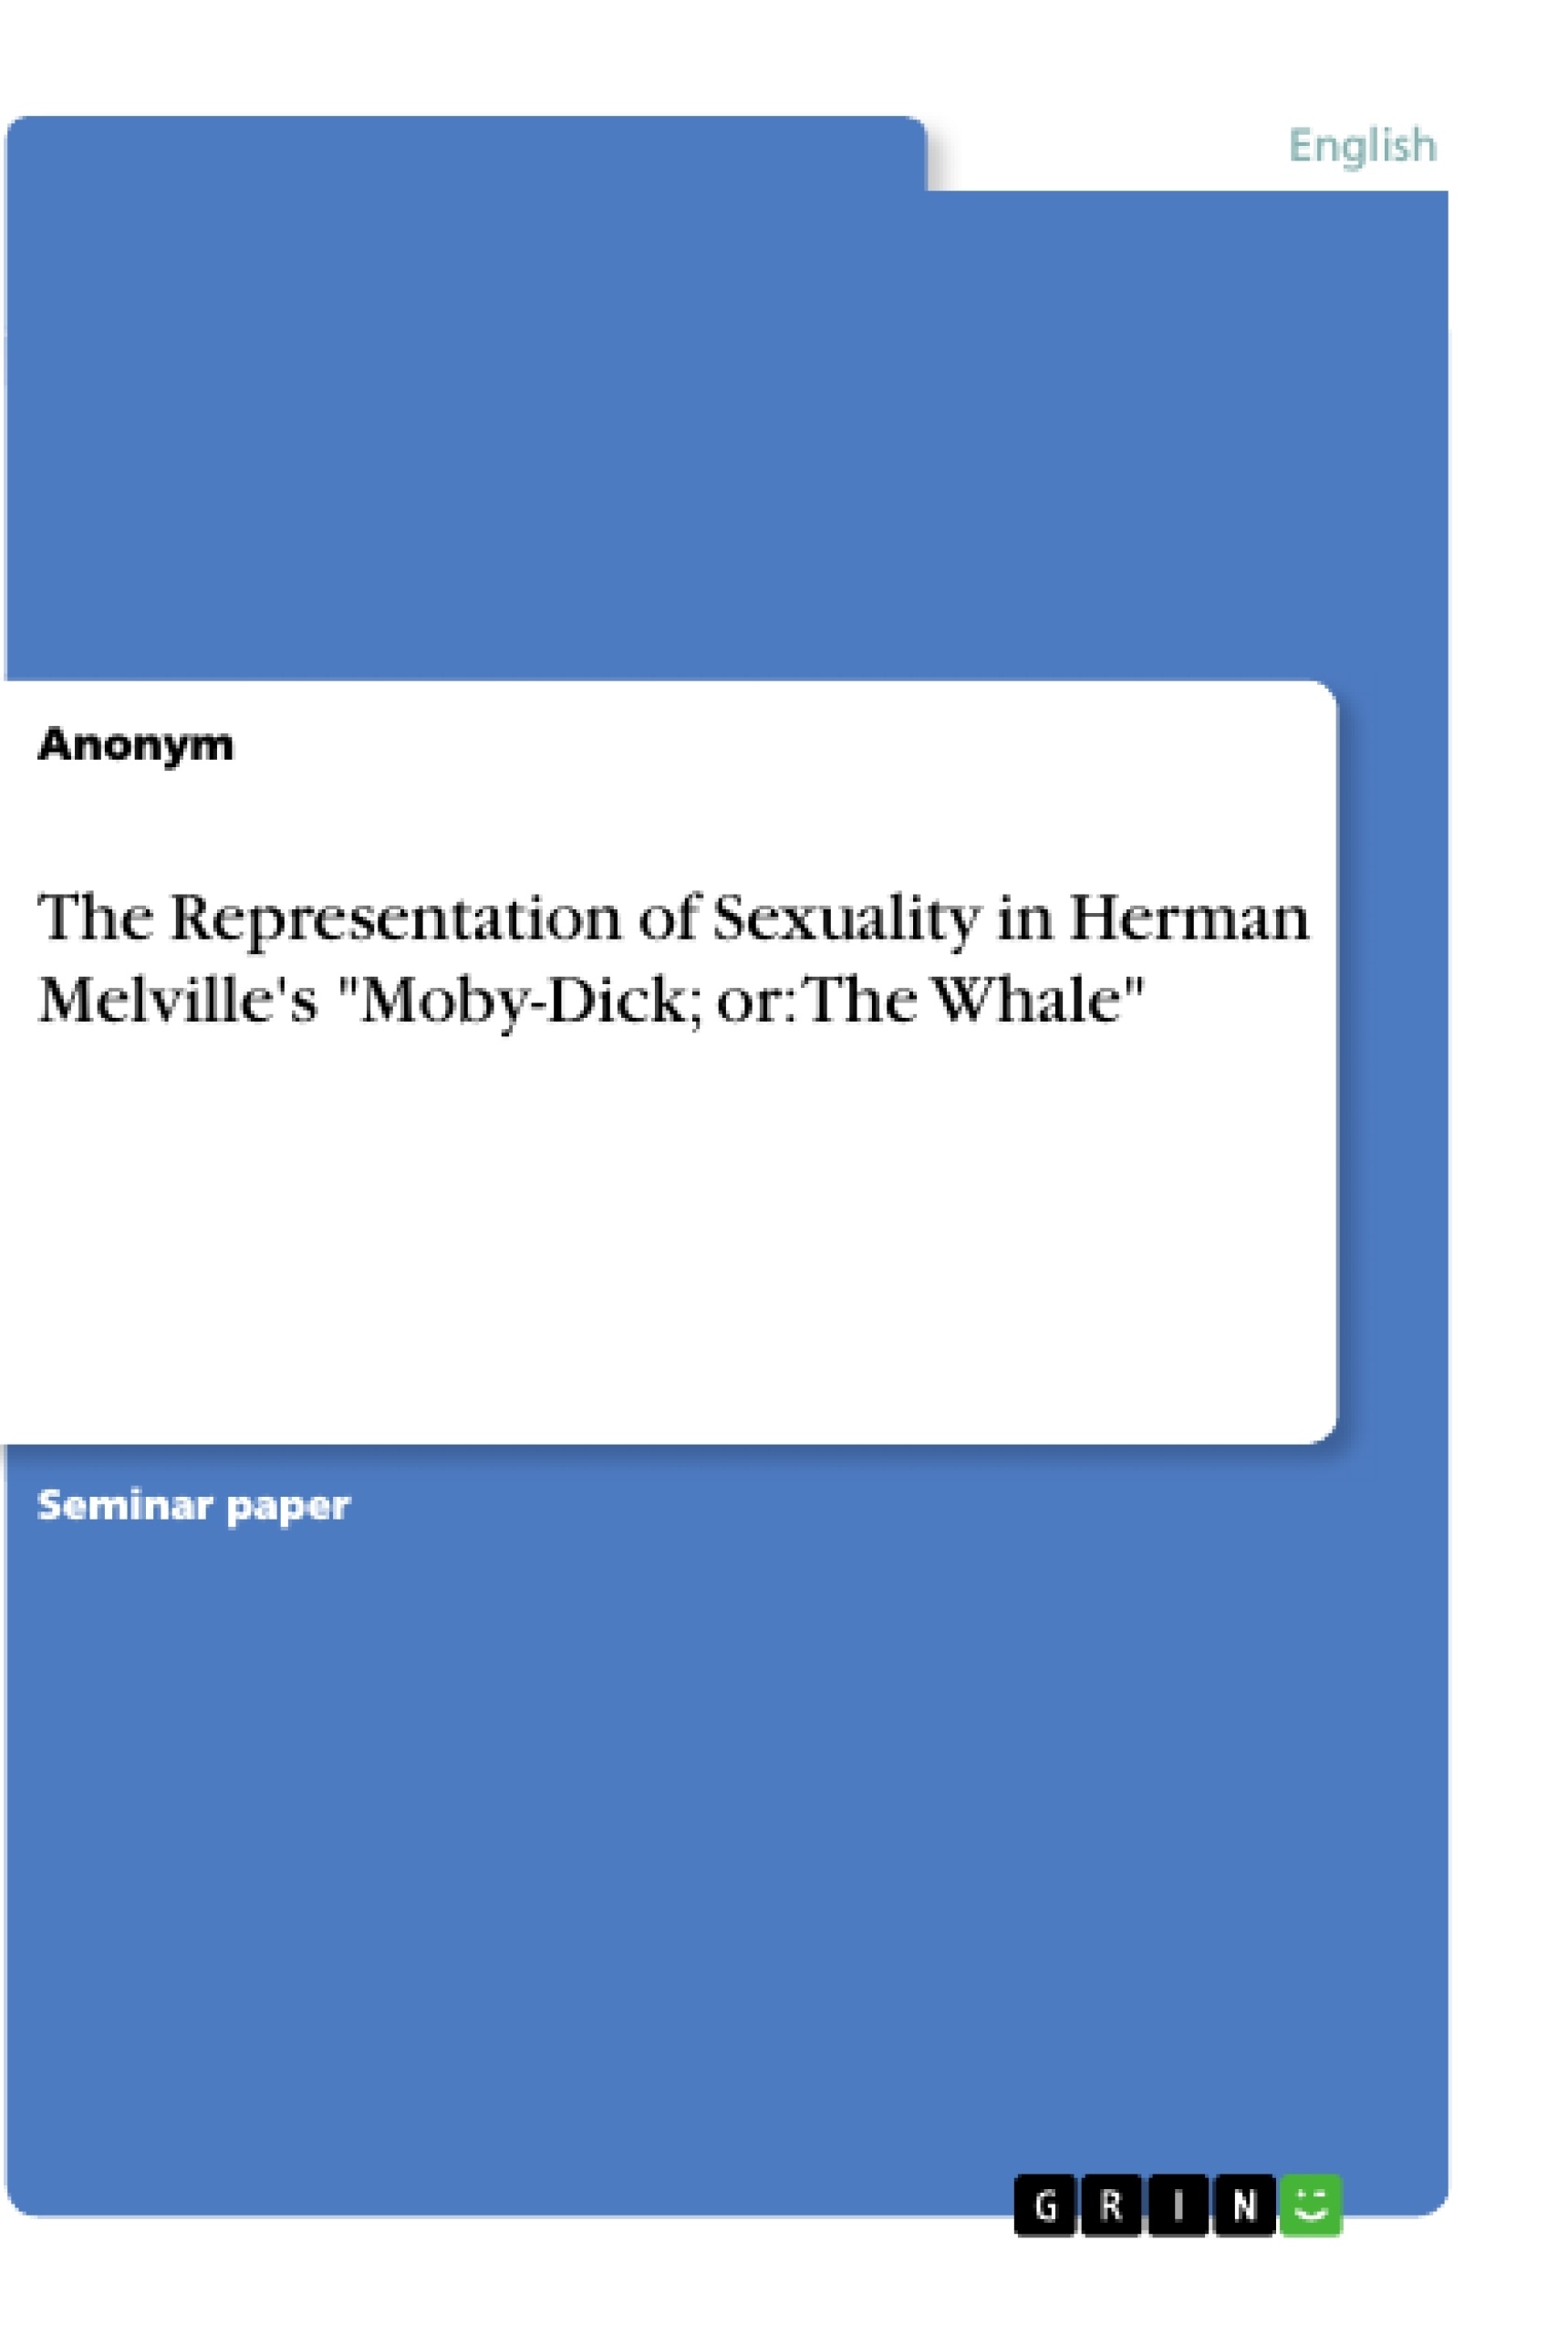 Título: The Representation of Sexuality in Herman Melville's "Moby-Dick; or: The Whale"